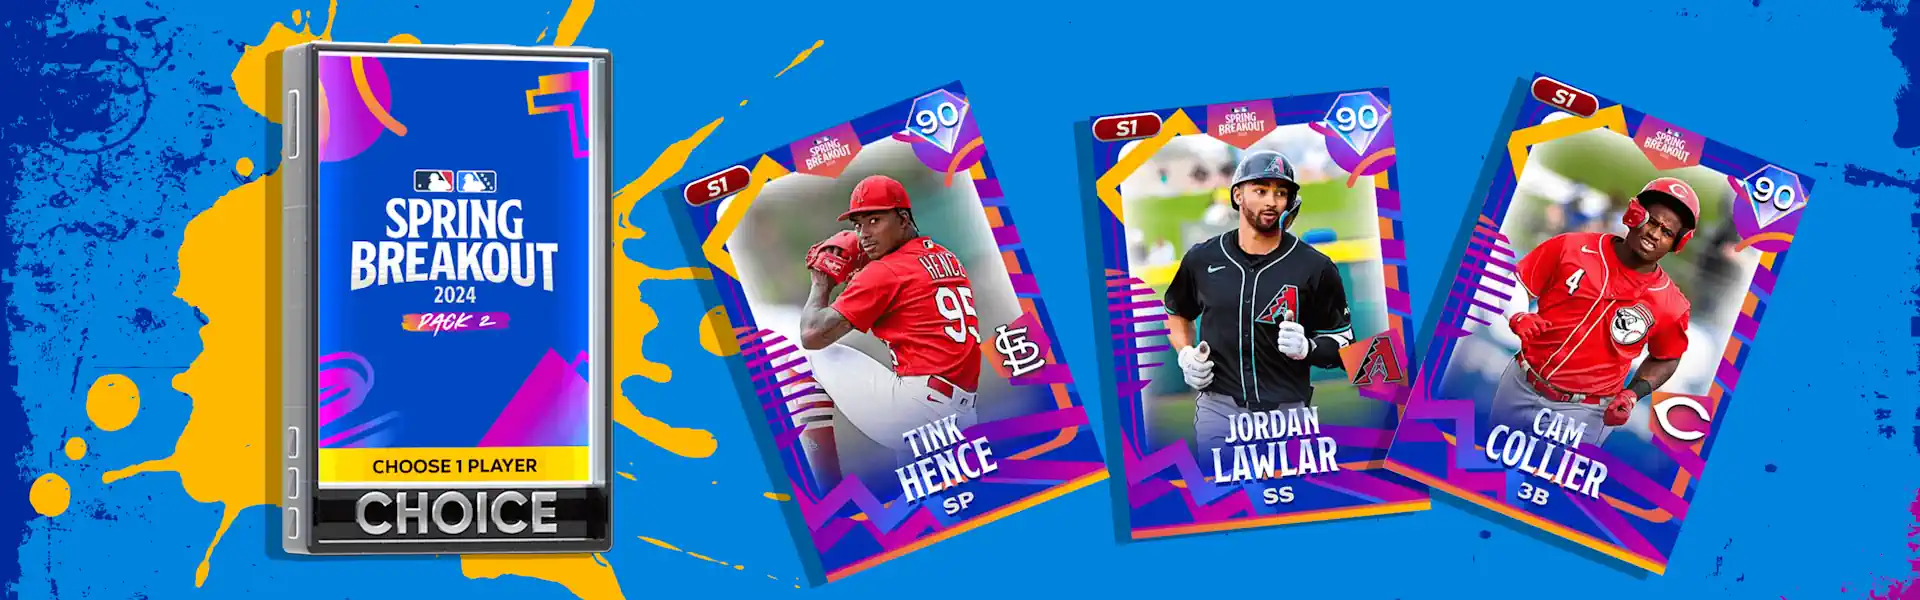 Spring Breakout Pack 2 - Rare Round